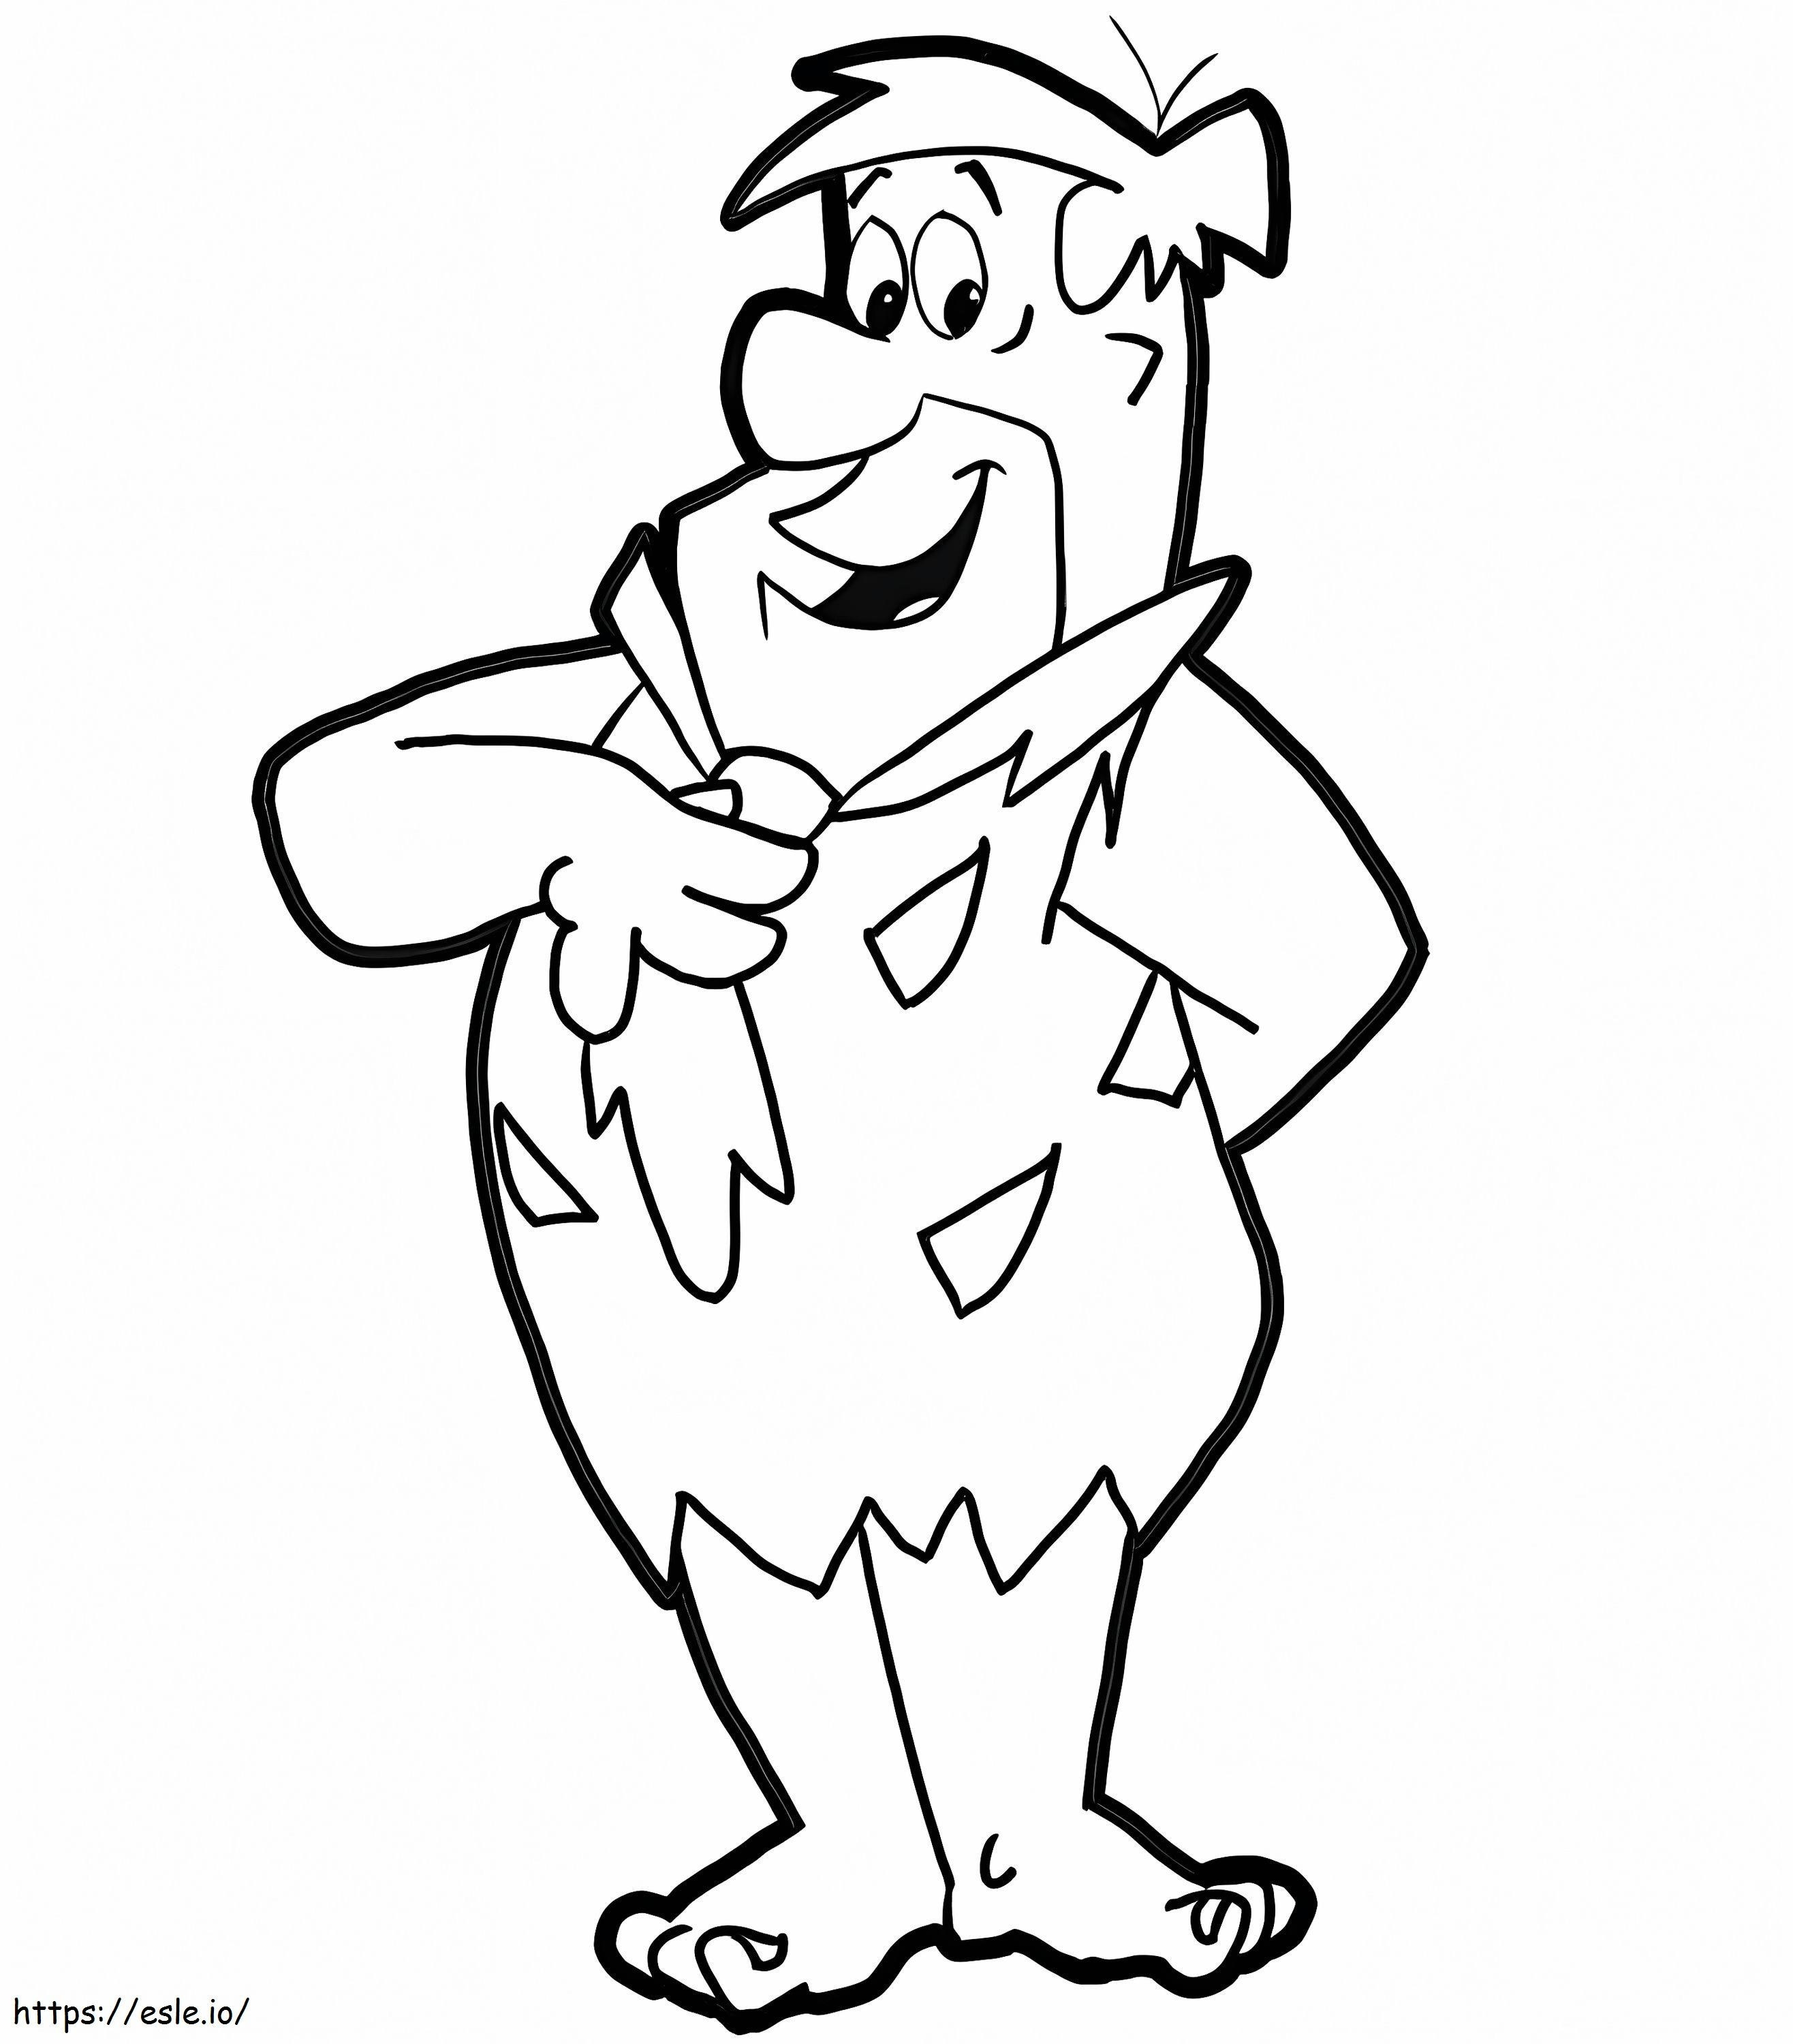 Fred Flintstone coloring page